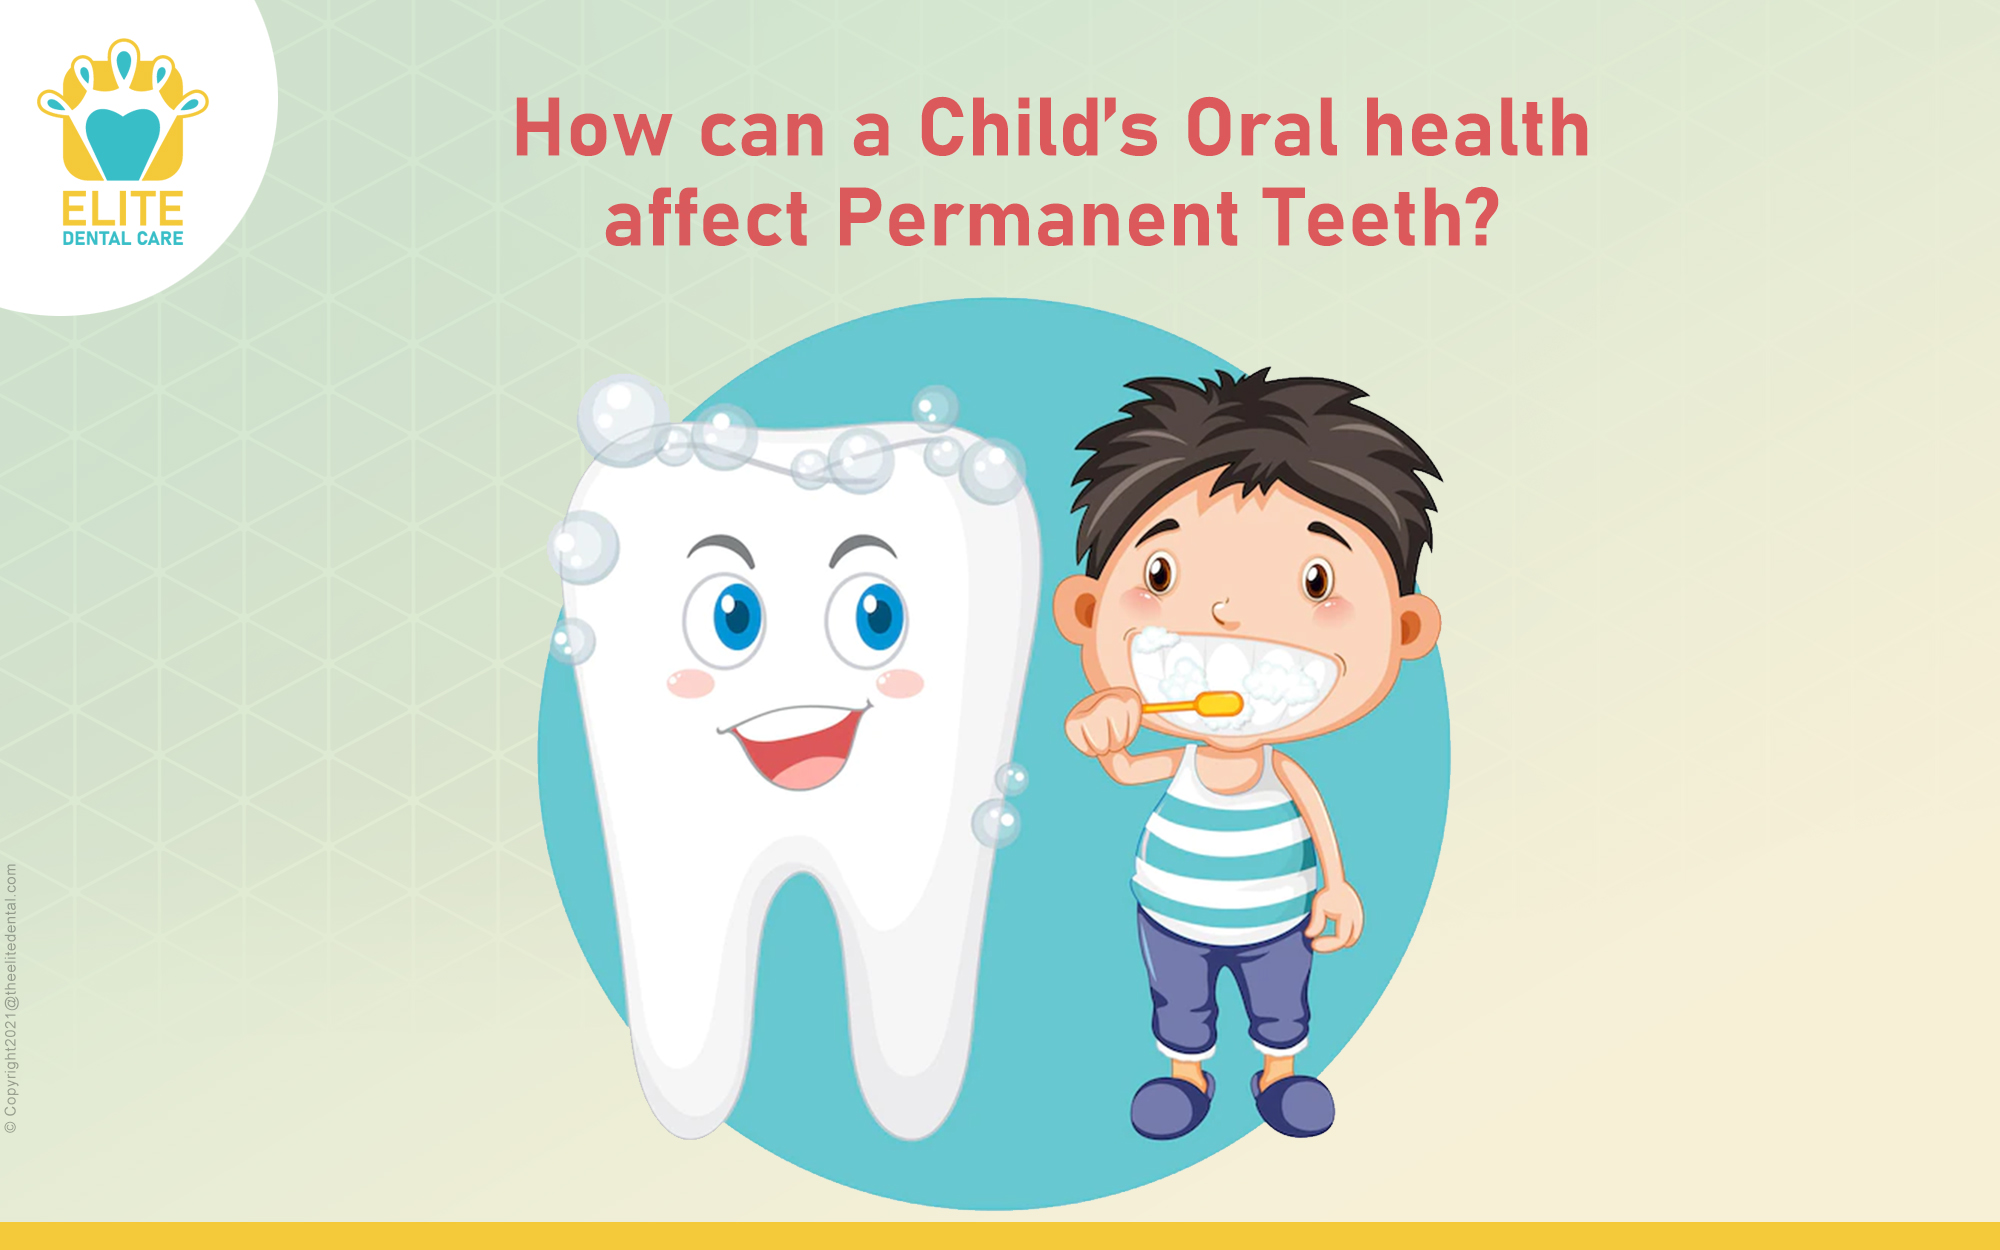 How does a child’s oral health affect their permanent teeth?